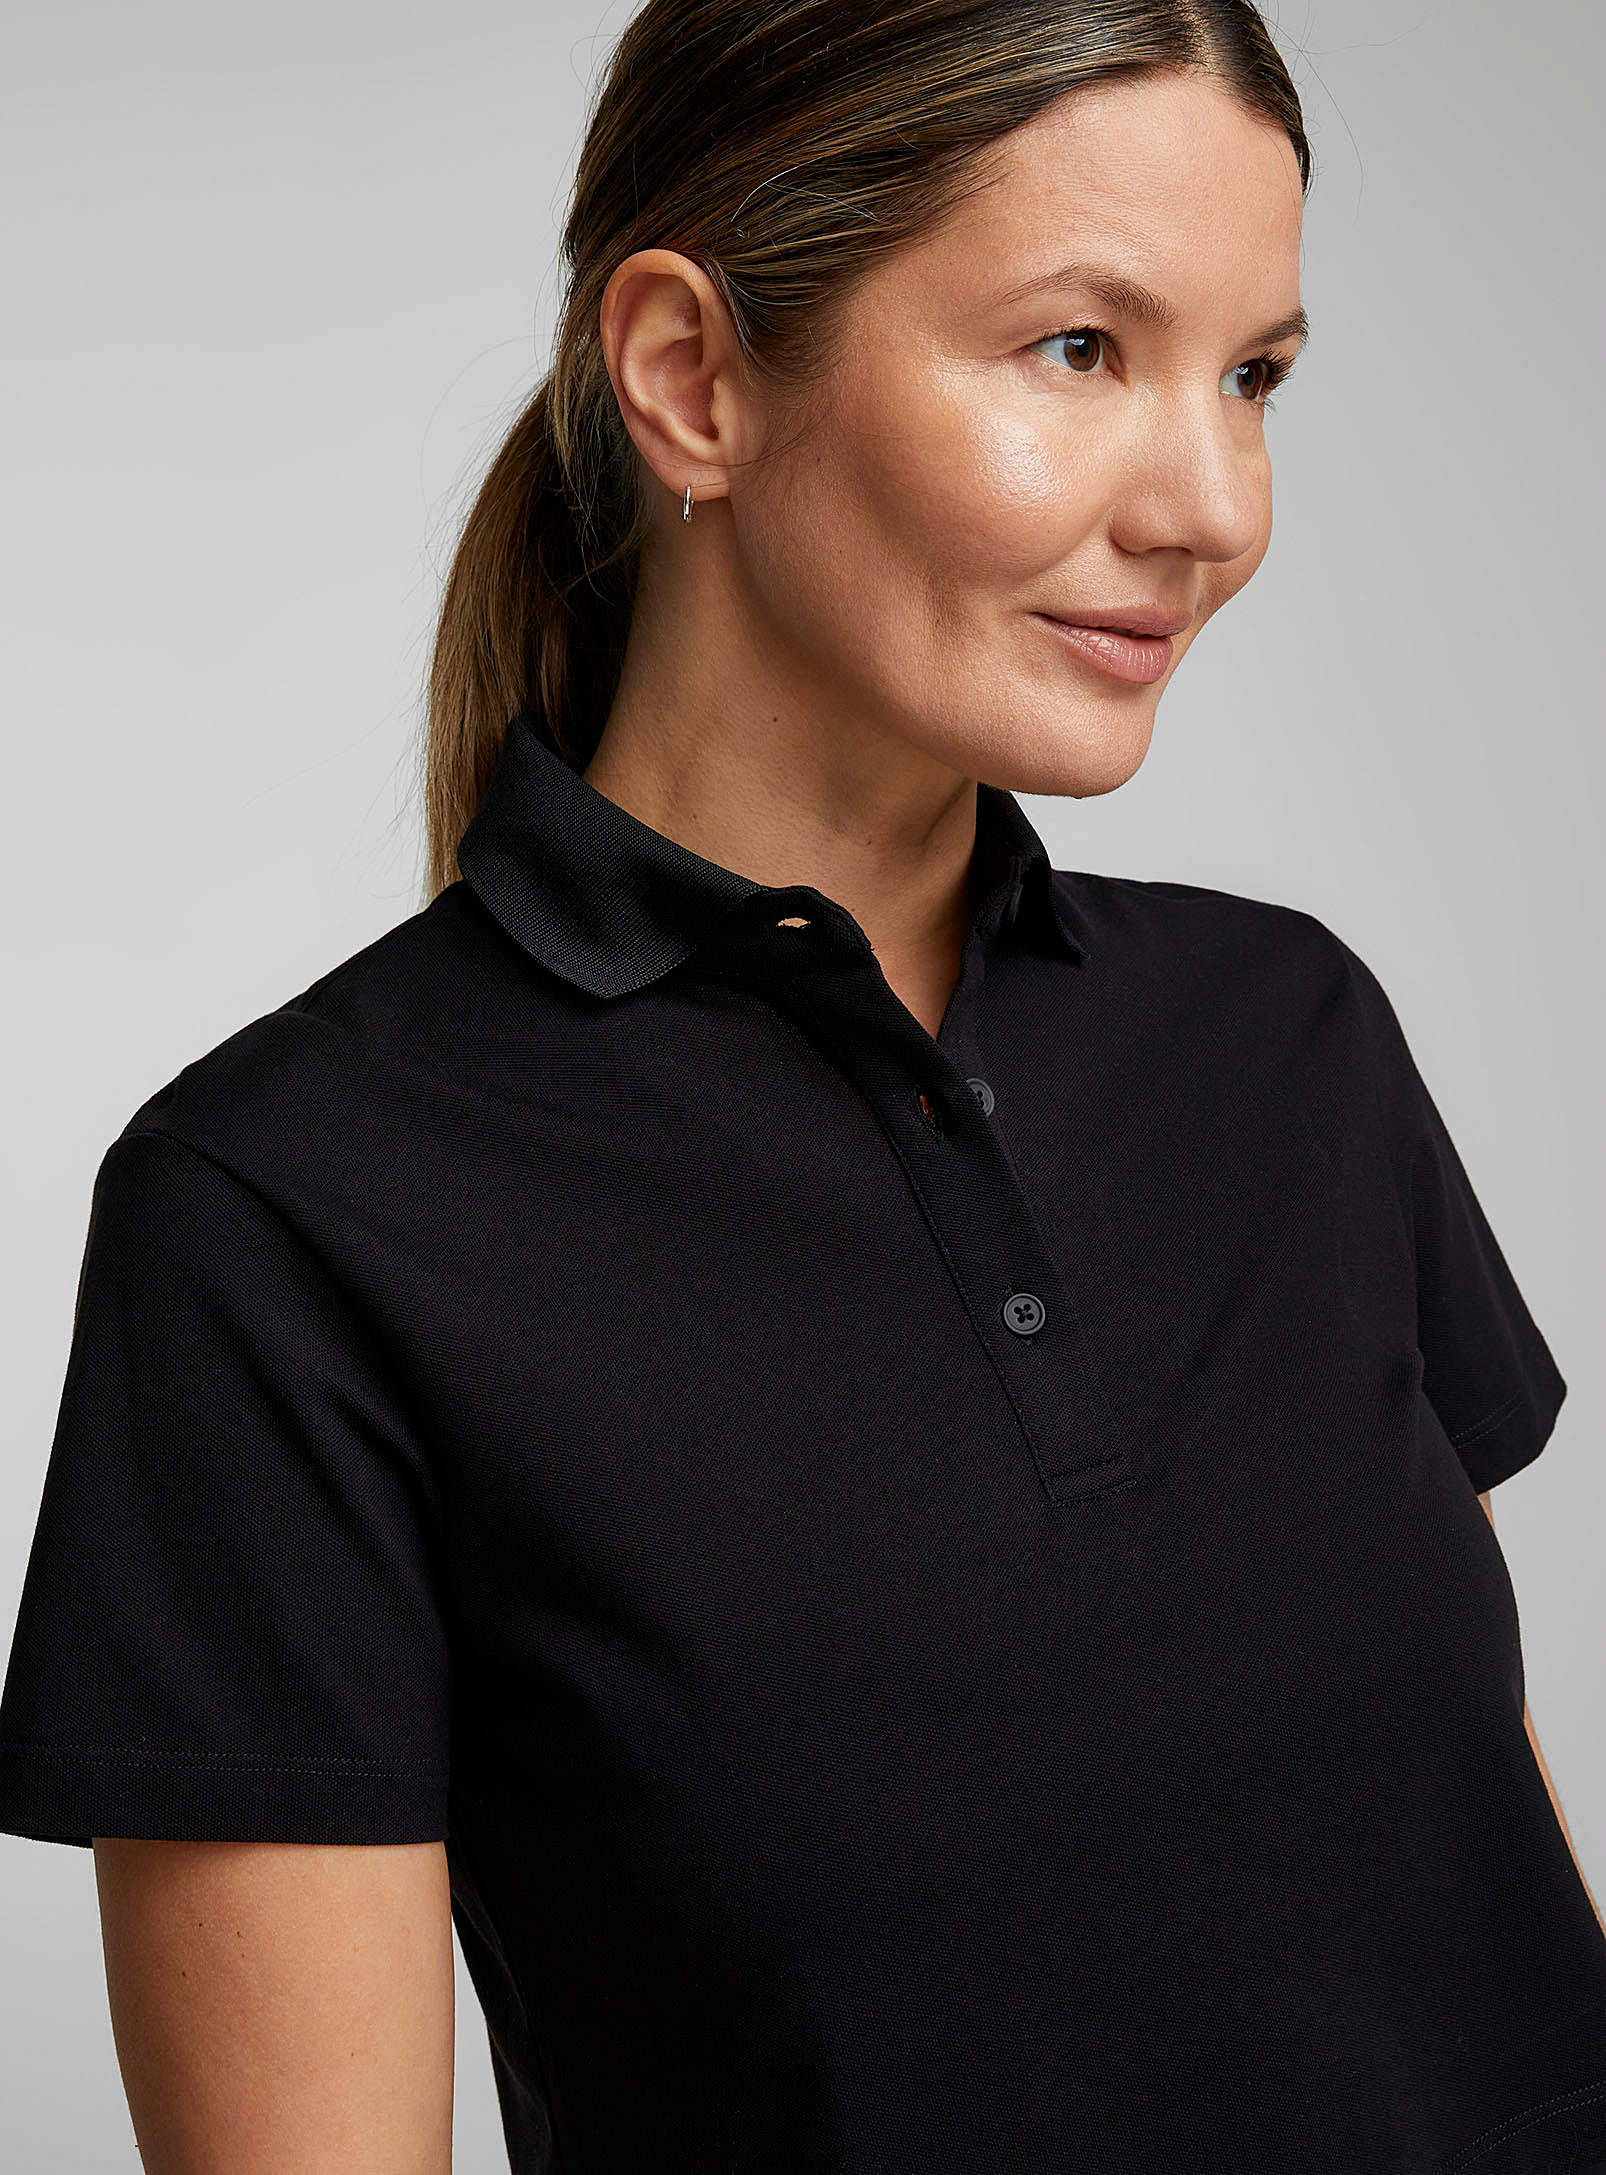 I.fiv5 Cropped Organic Cotton Piqué Jersey Polo In Black